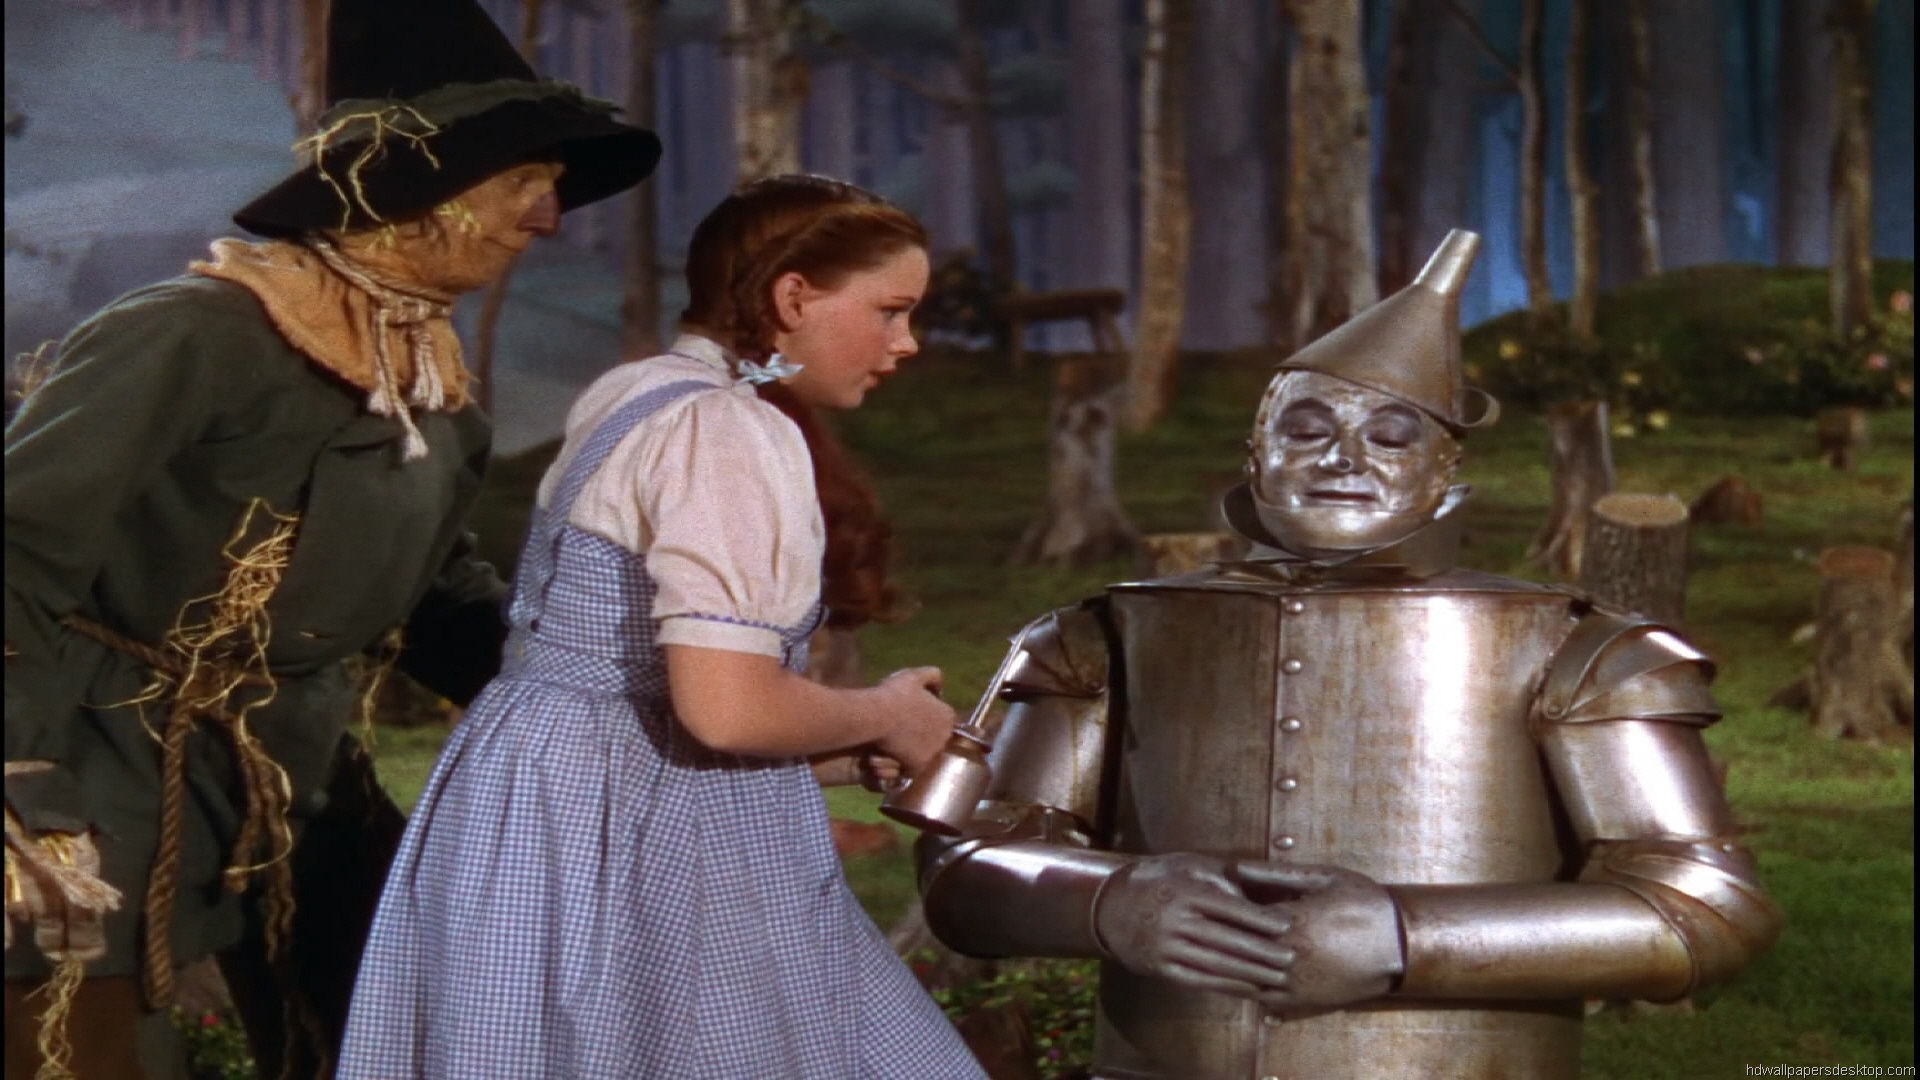 31 Wizard Of Oz Wallpapers Hd On Wallpapersafari Images, Photos, Reviews